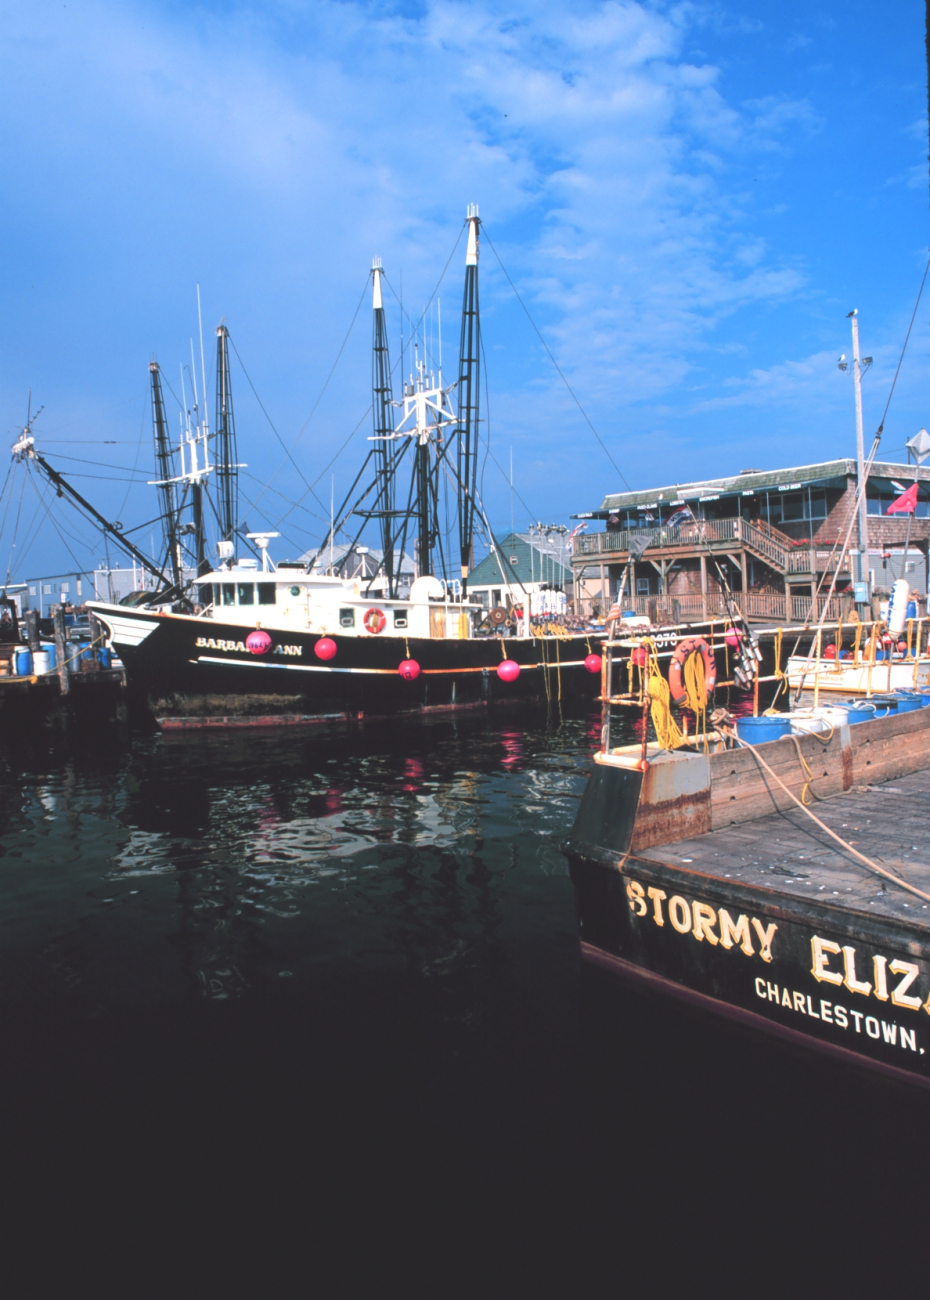 The STORMY ELIZABETH and BARBARA ANN are offshore lobster boats